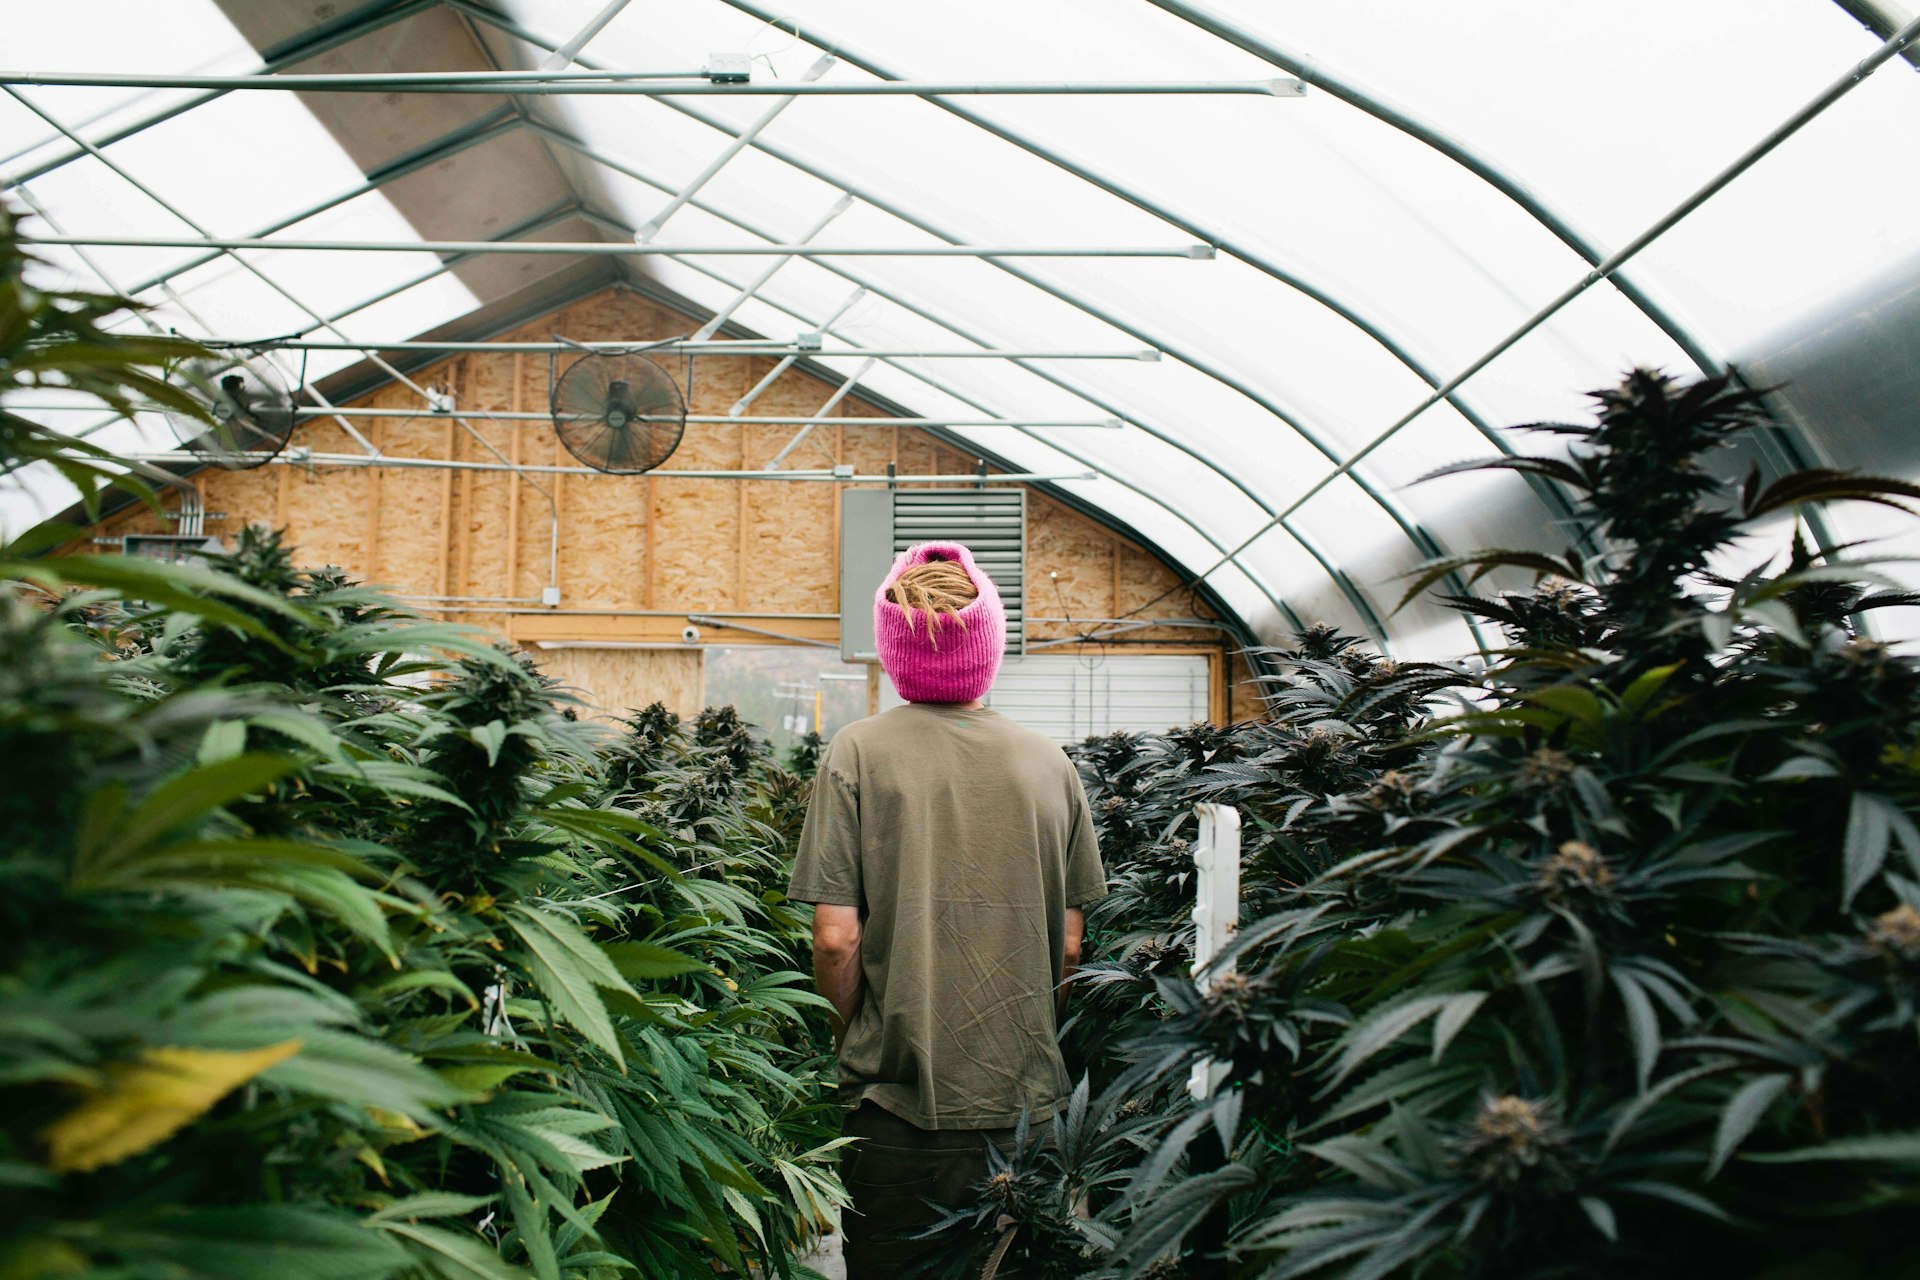 Behind the scenes at America’s new legal cannabis farms